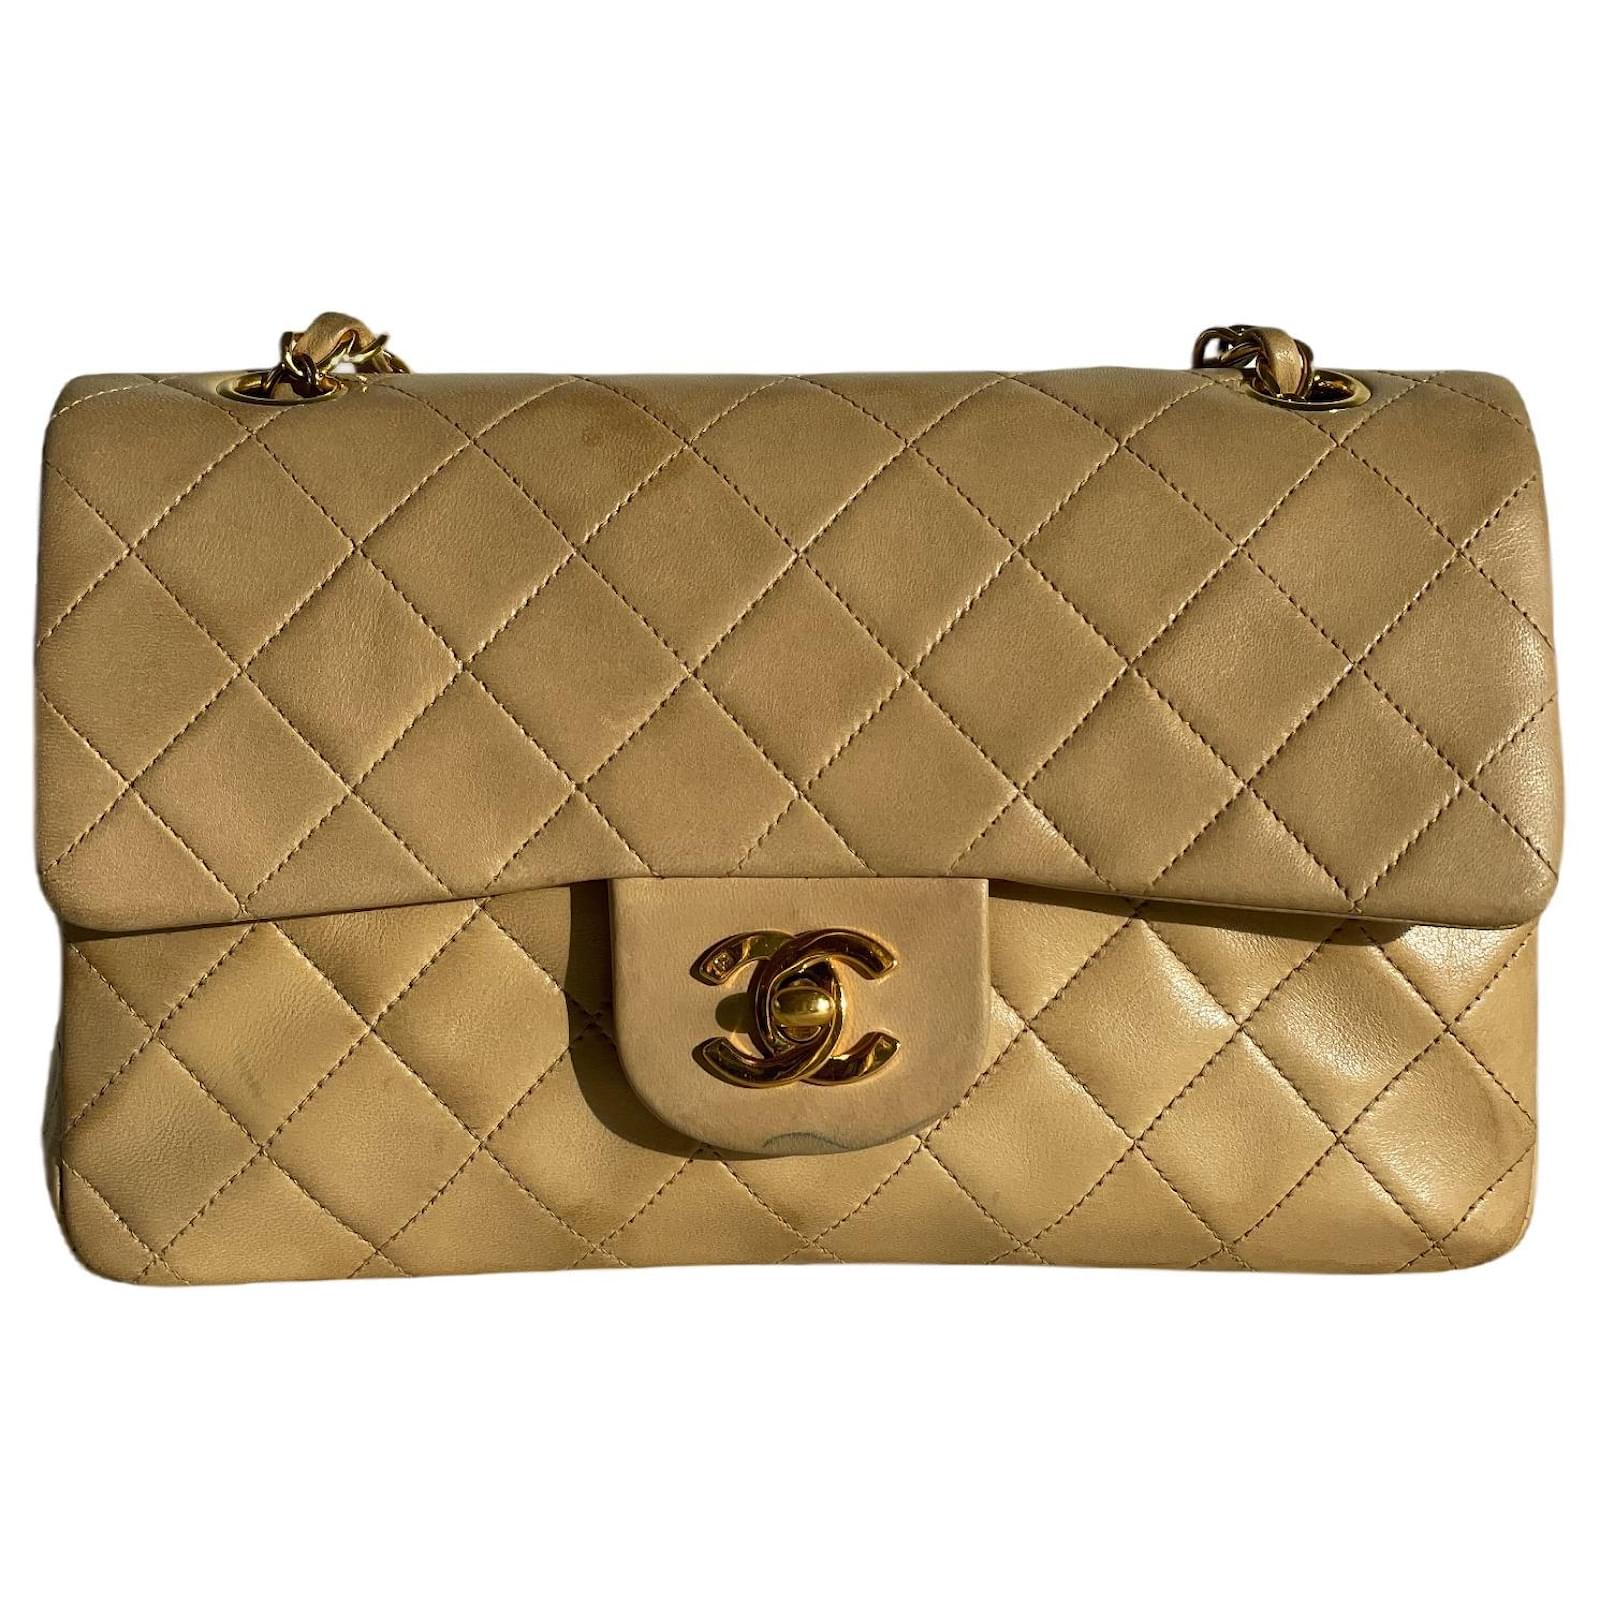 Chanel classic lined flap small lambskin gold hardware timeless